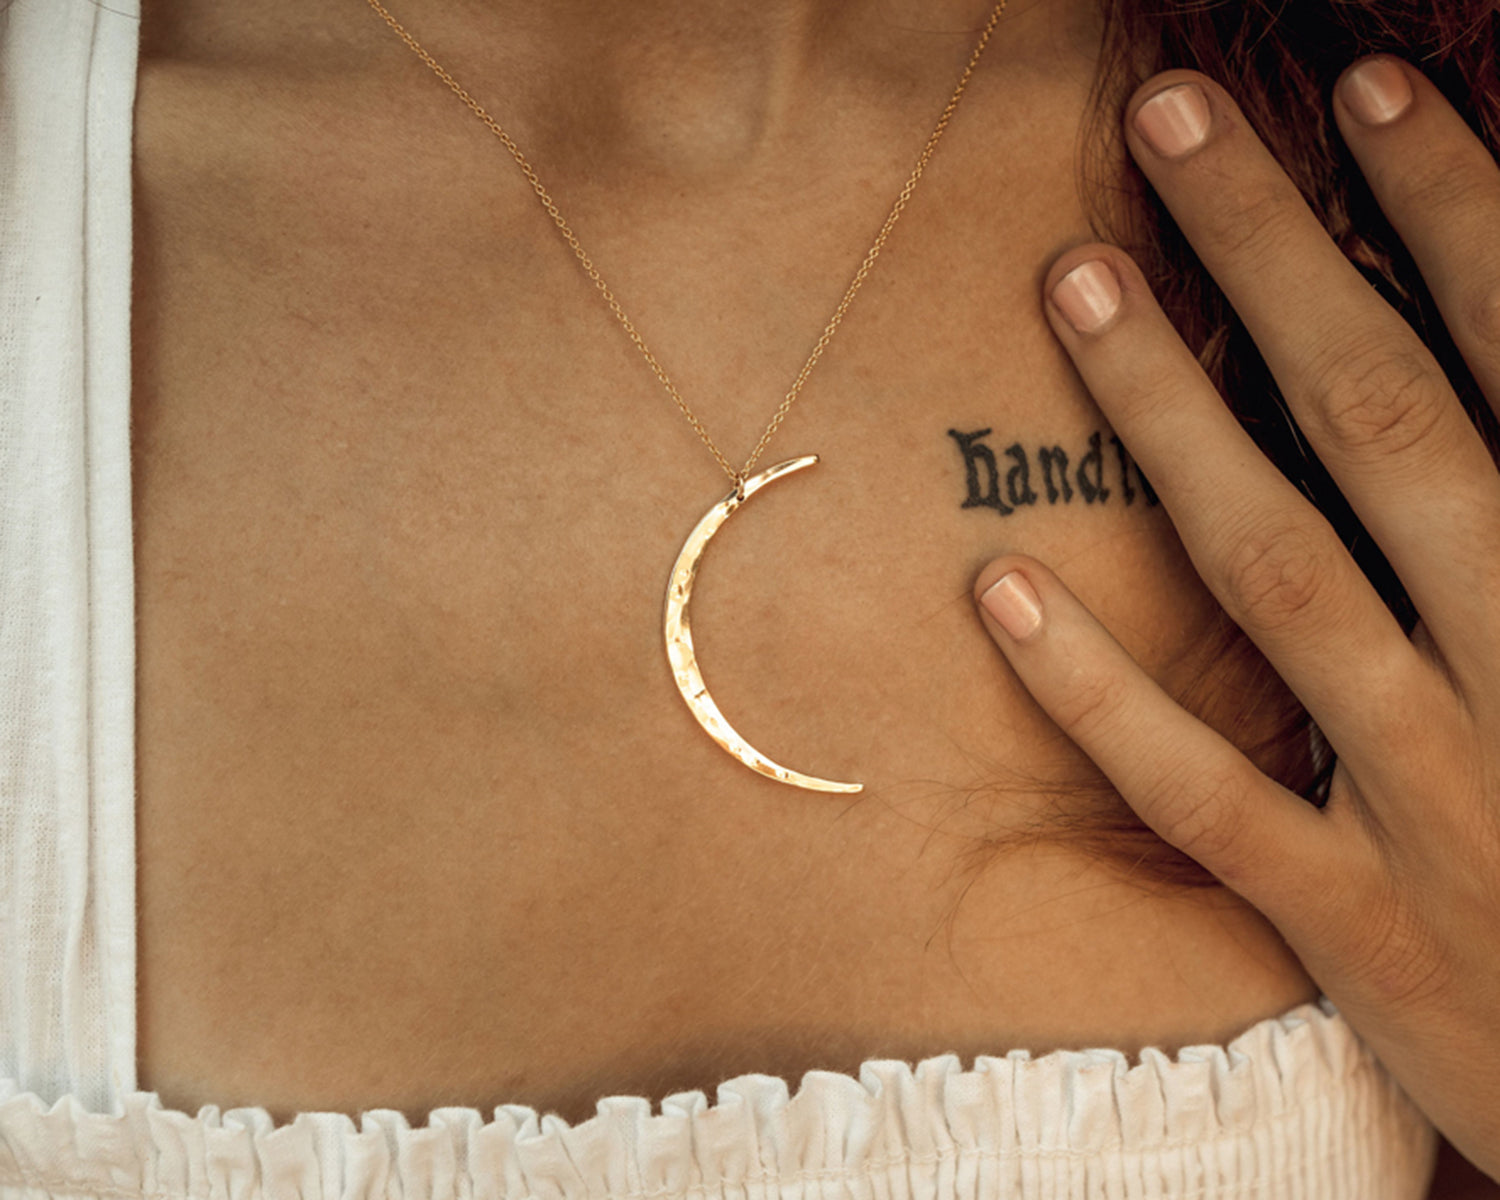 Manifesting Crescent Moon Necklace - 14k Gold-filled – Wanderbliss Jewelry